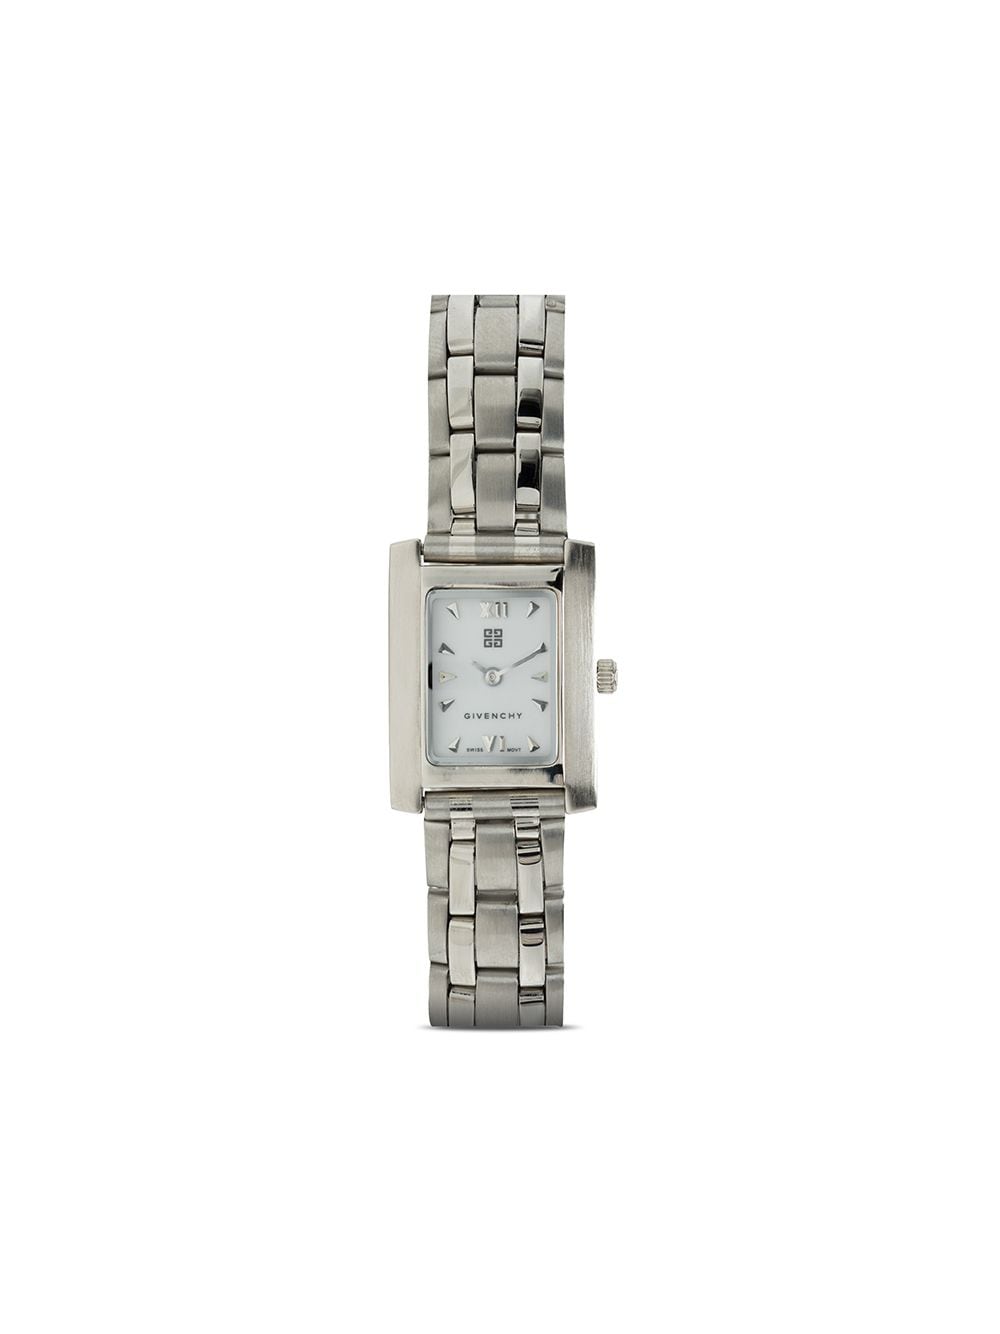 Givenchy Pre-Owned Square Face Quartz Watch - Farfetch